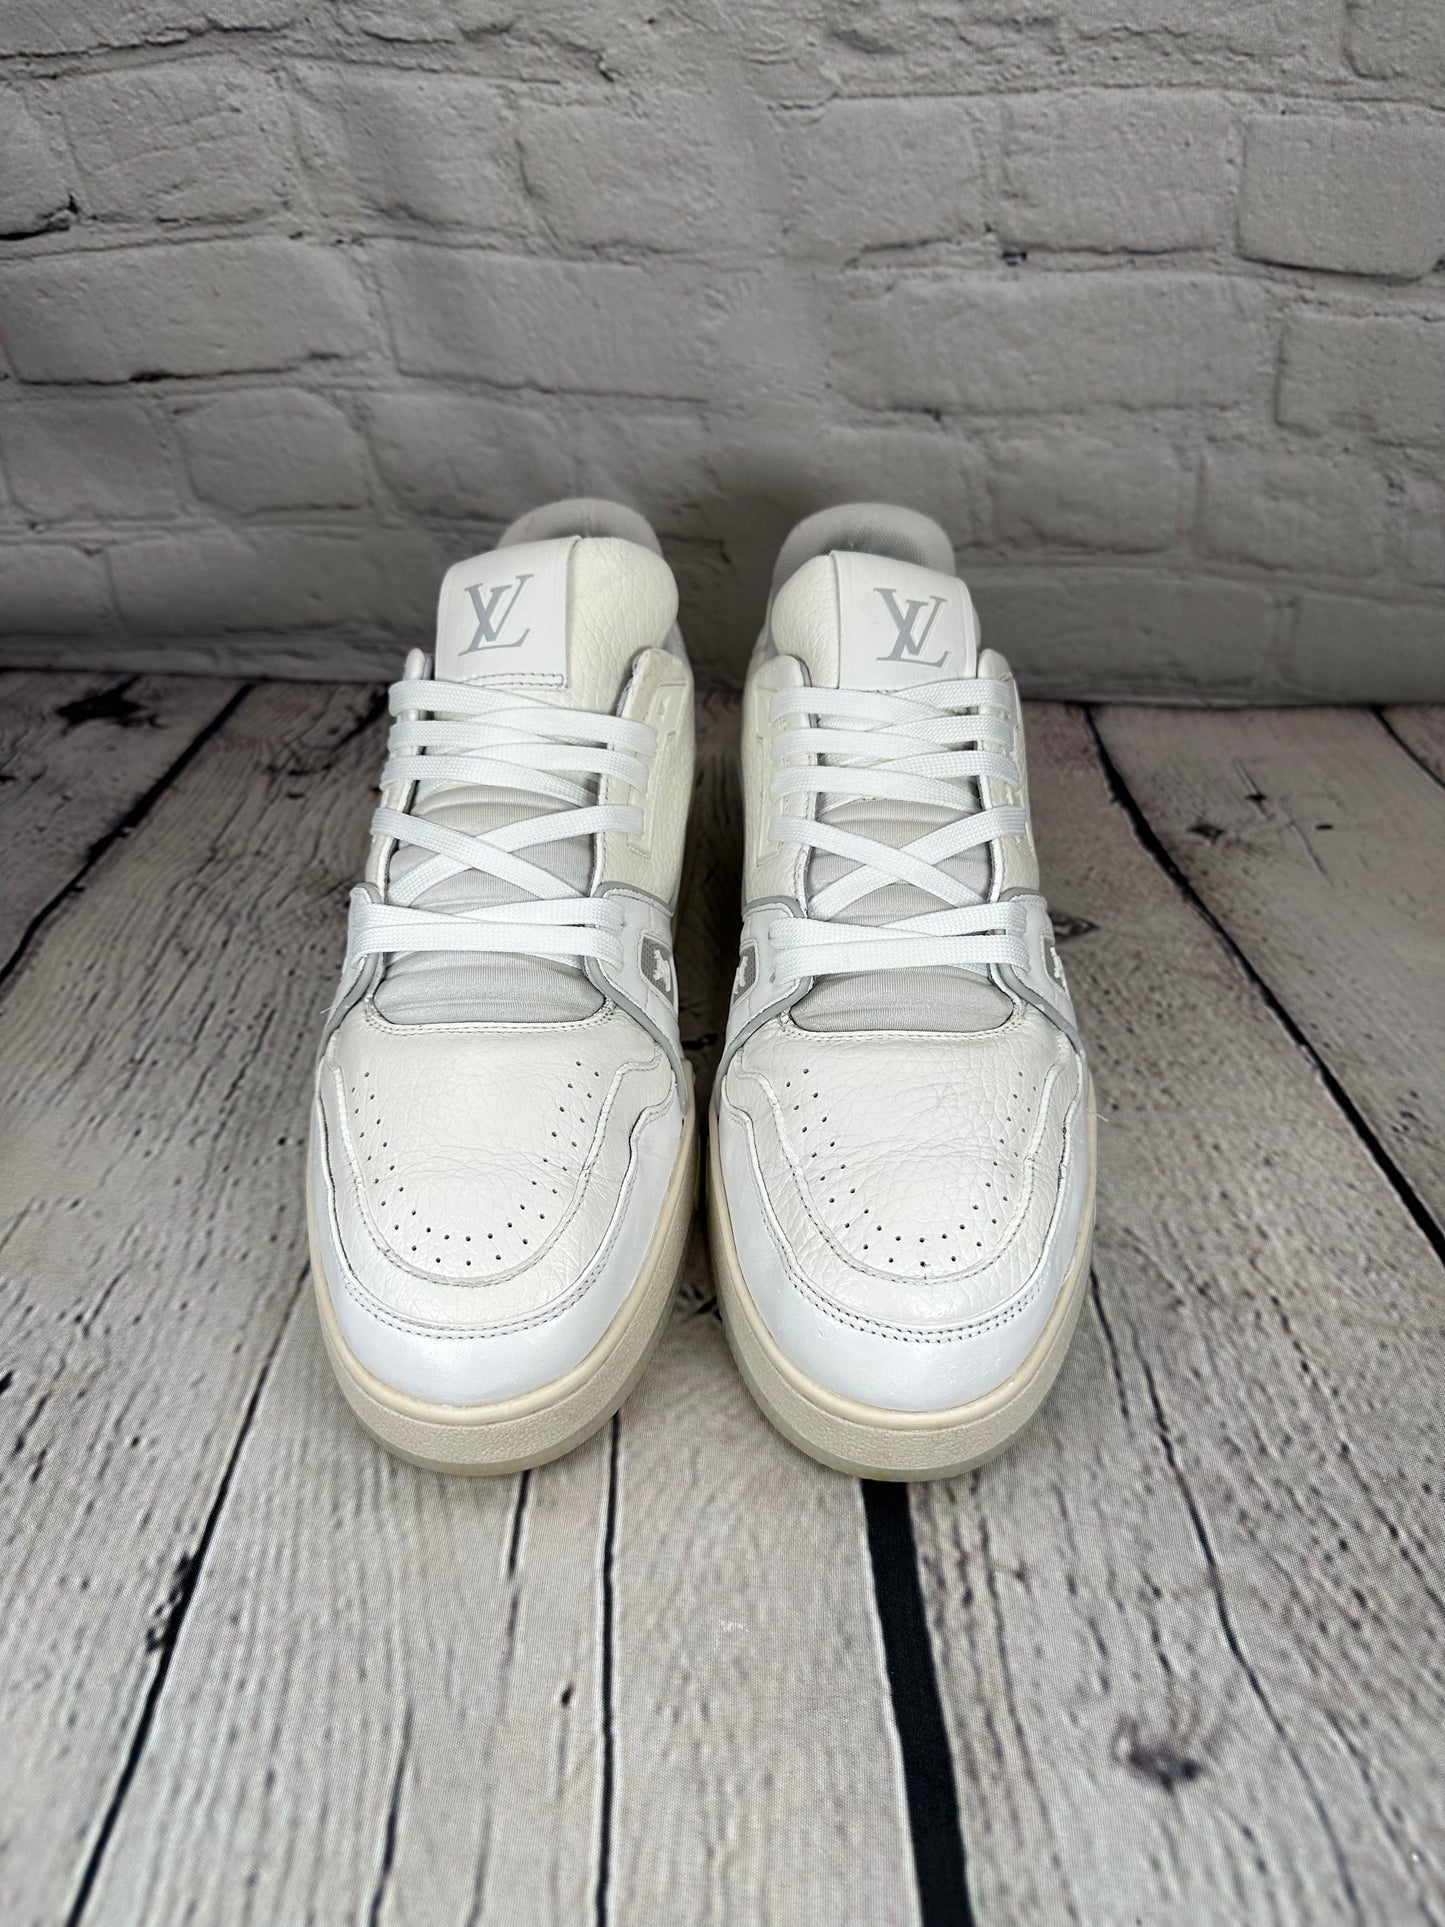 Louis Vuitton Trainers UK8 (FITS UK9)